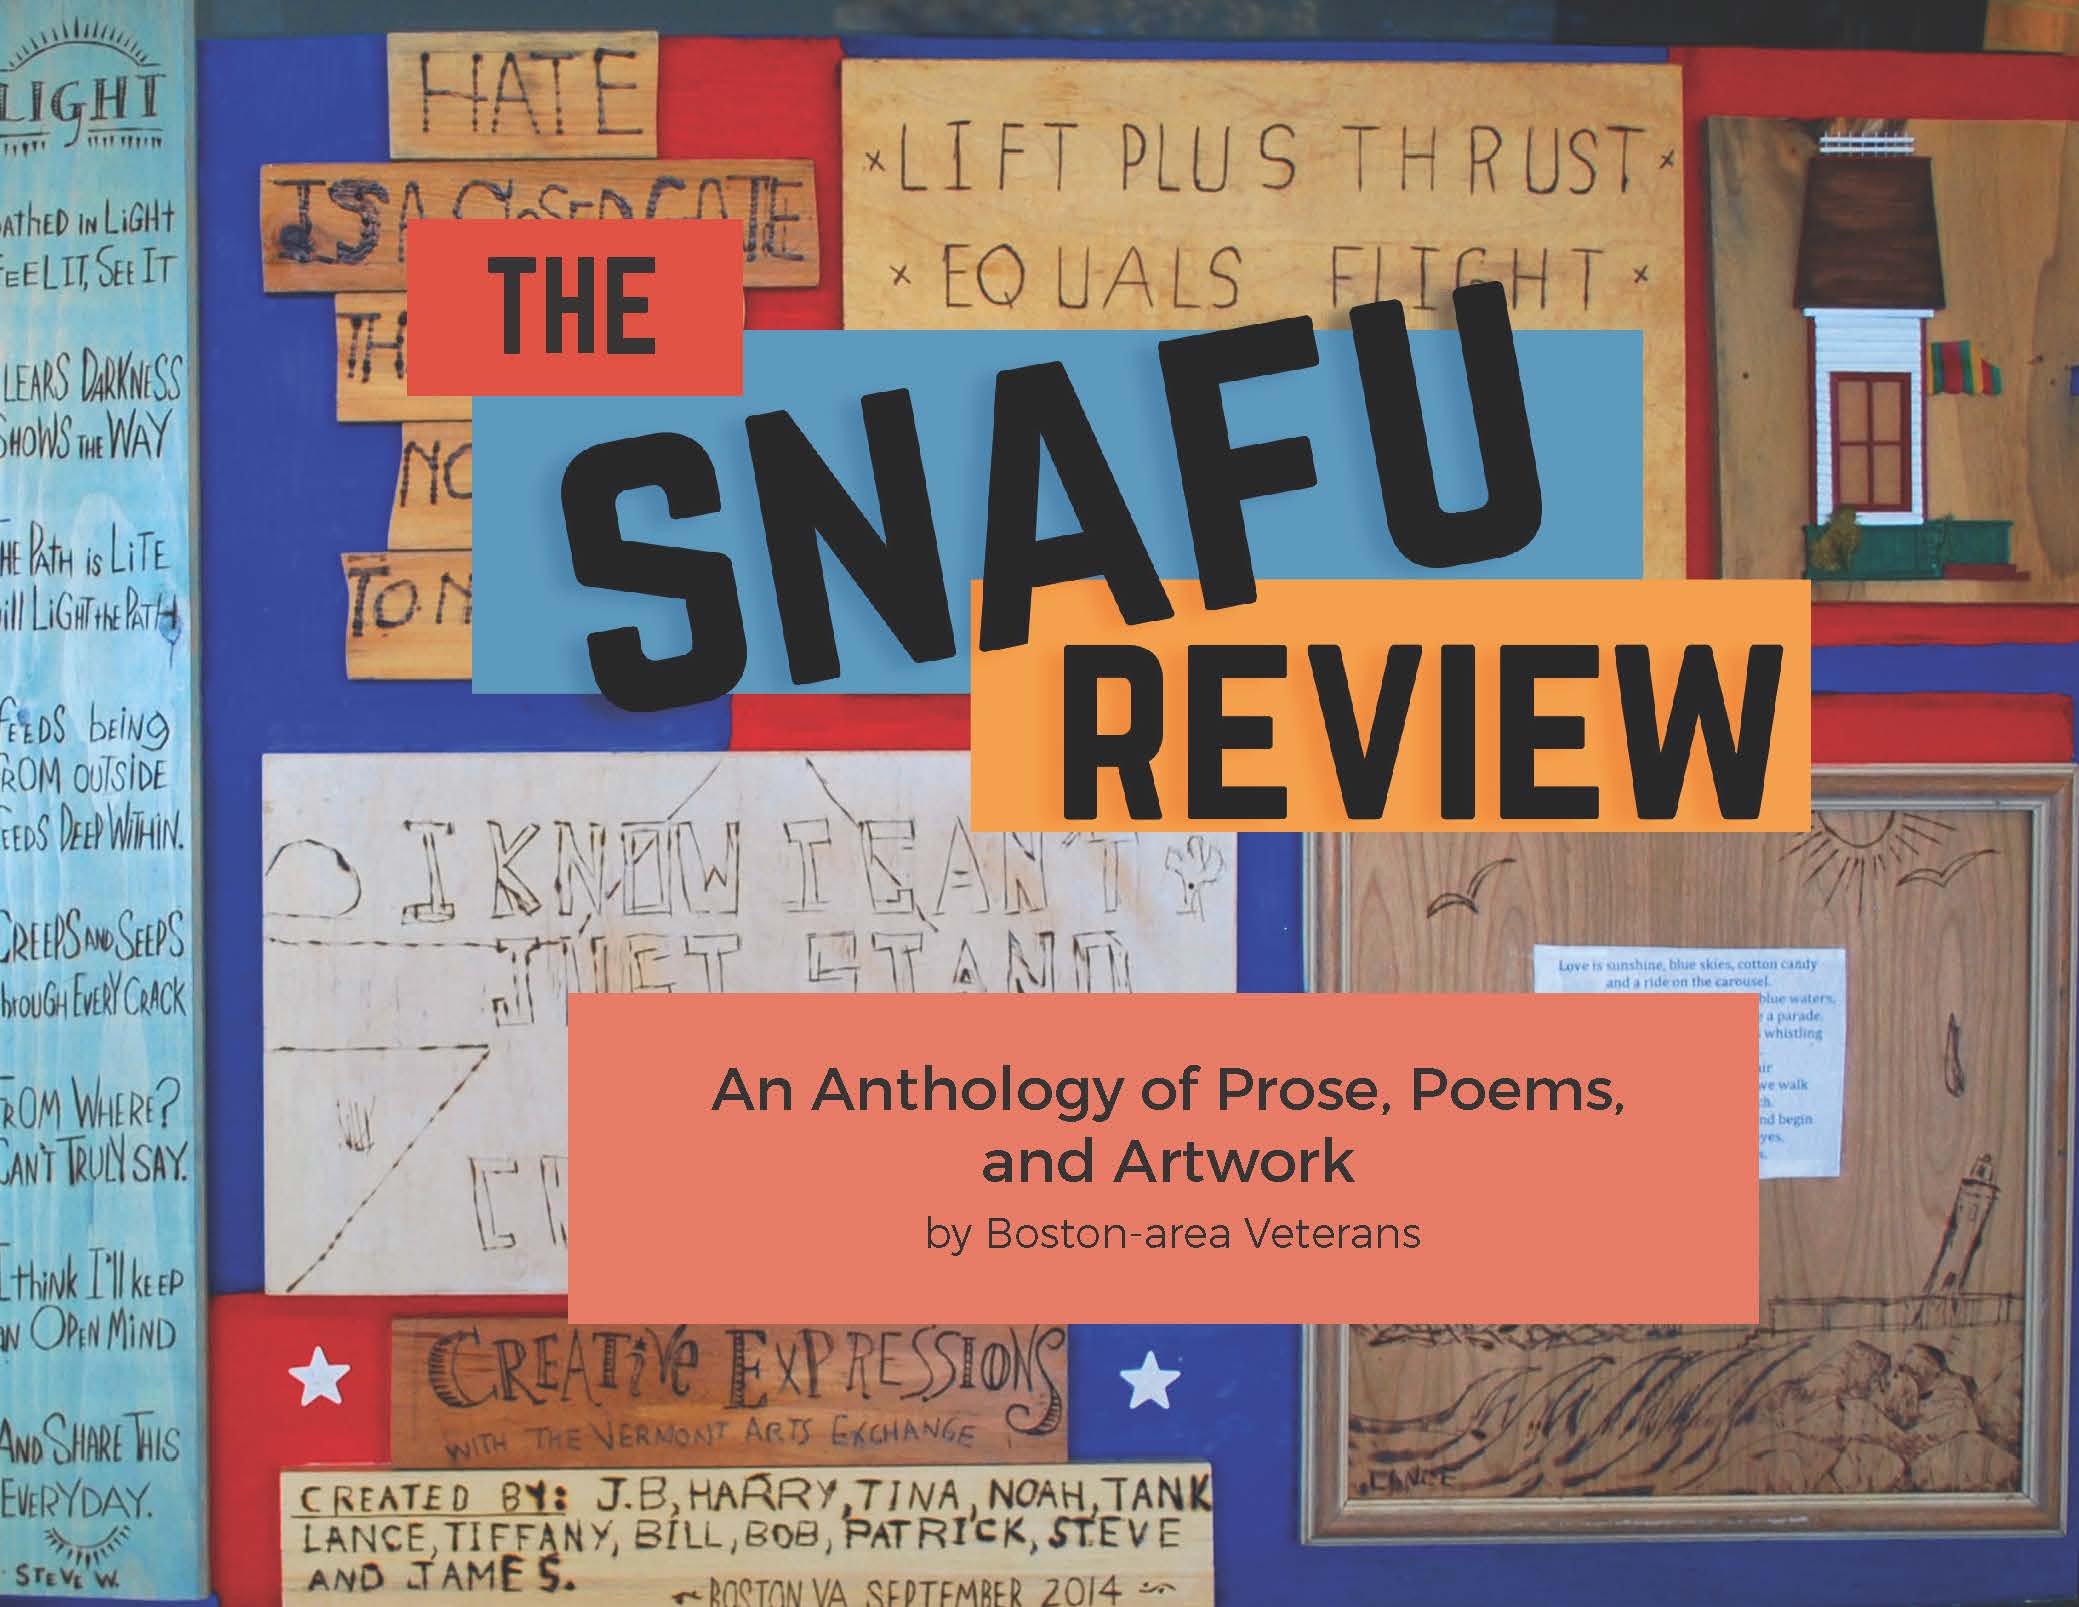  The SNAFU Review – An Anthology of Prose, Poems, and Artwork 